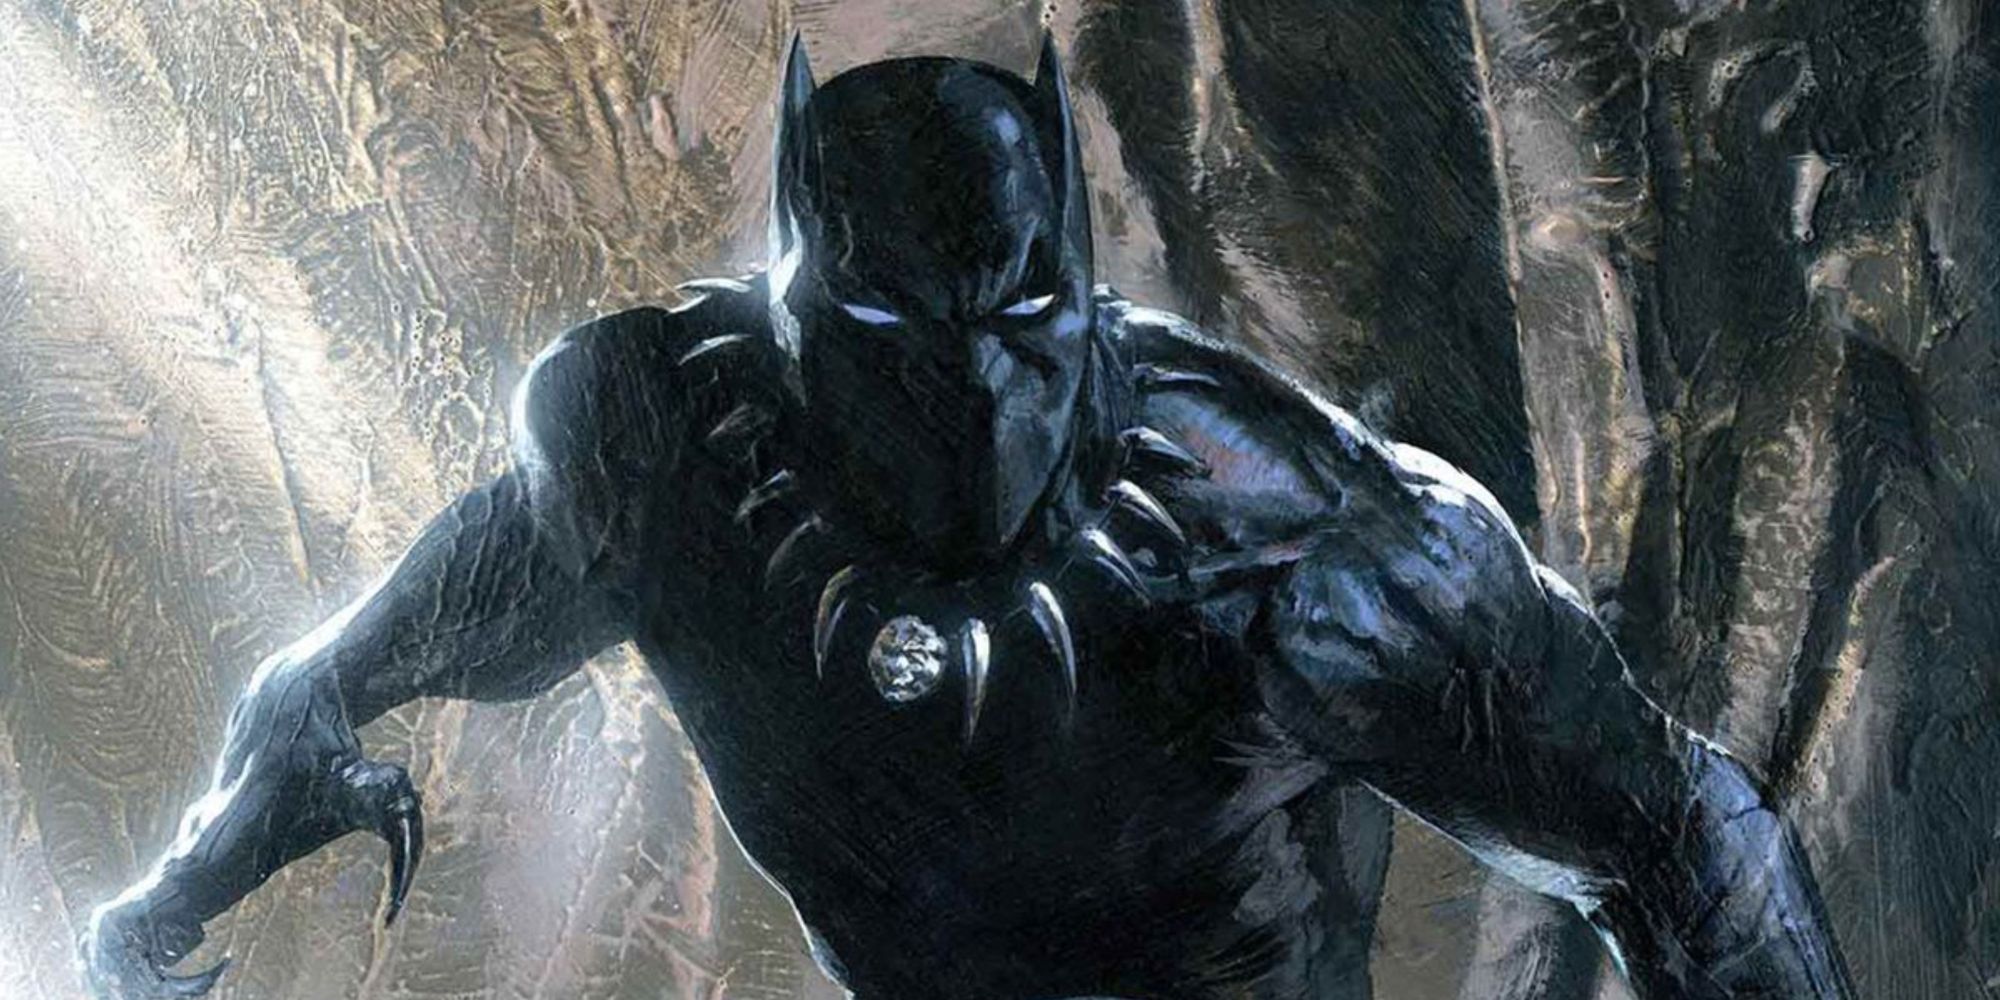 Black Panther Wearing His Suits in a Cave